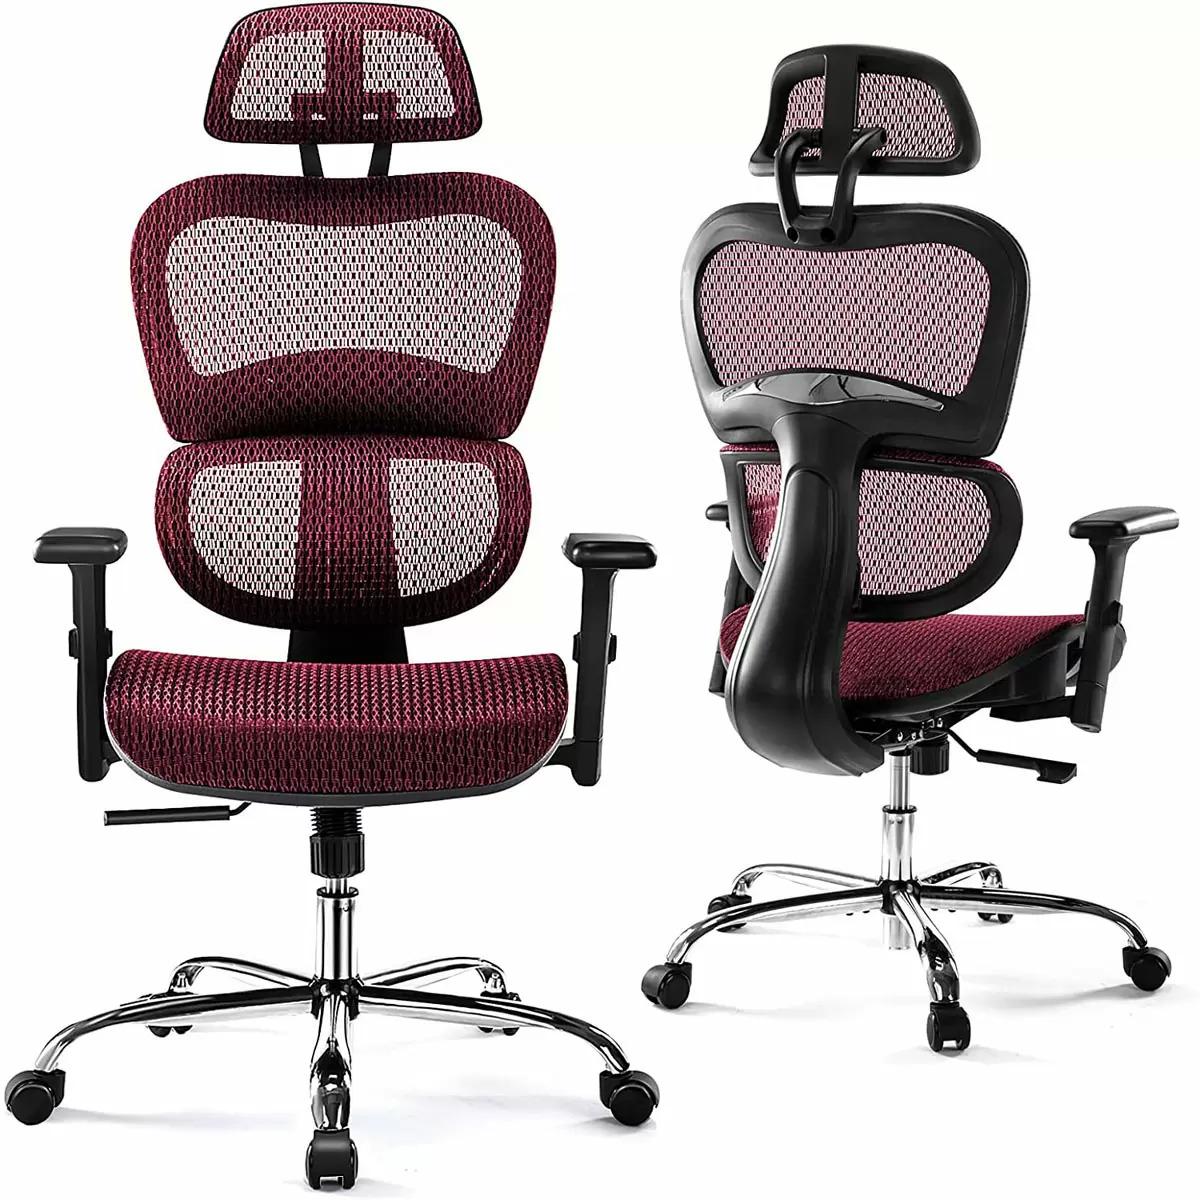 Ergonomic High Back Office Chair with Headrest for $119 Shipped